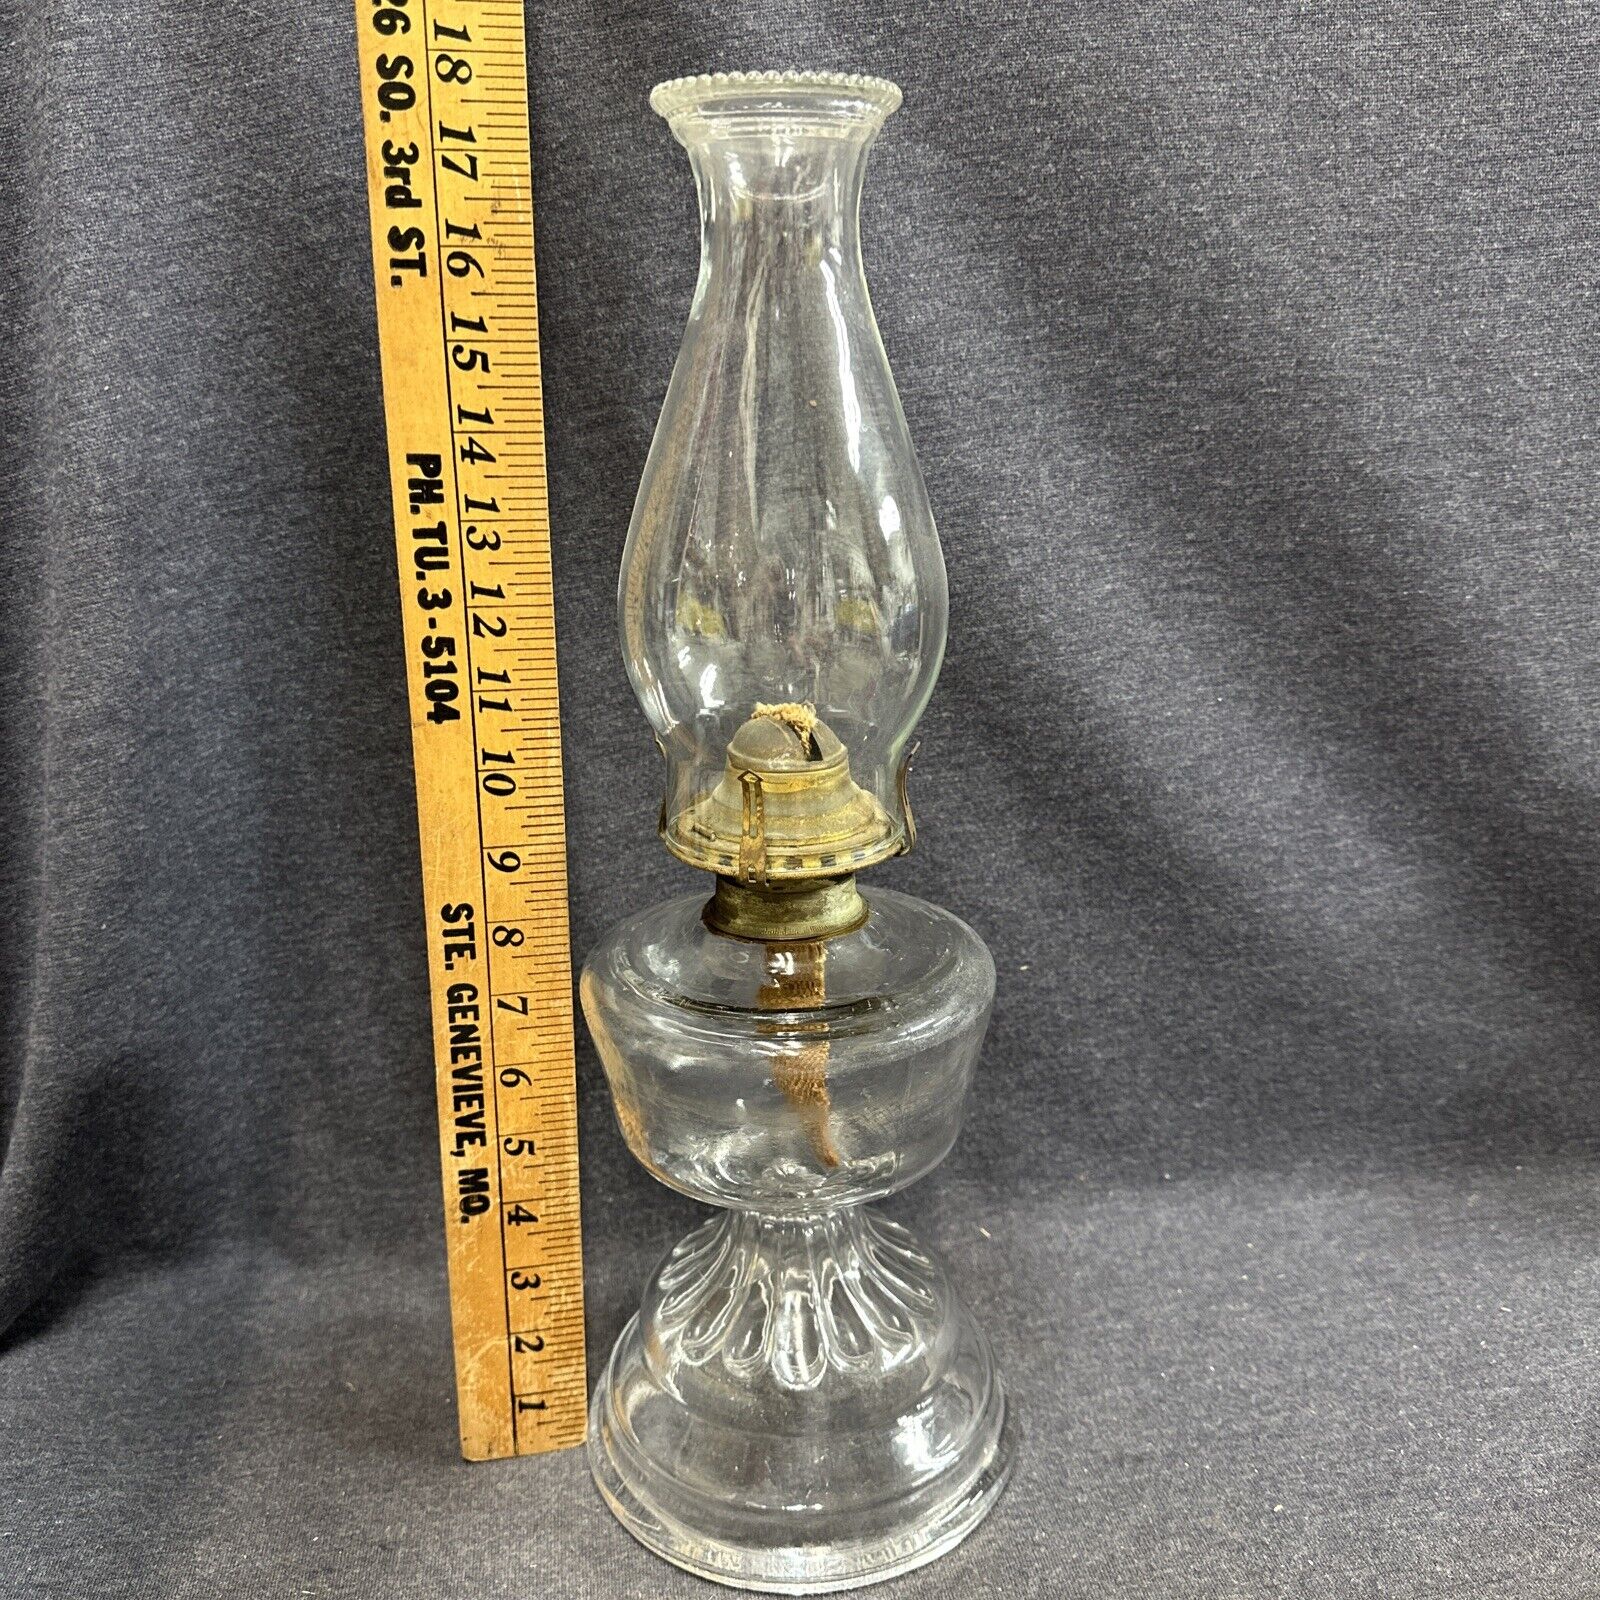 Vintage Scovill Mfg. Co. Queen Anne No. 2 Pedestal Oil Lamp EAPG Magnesium glass